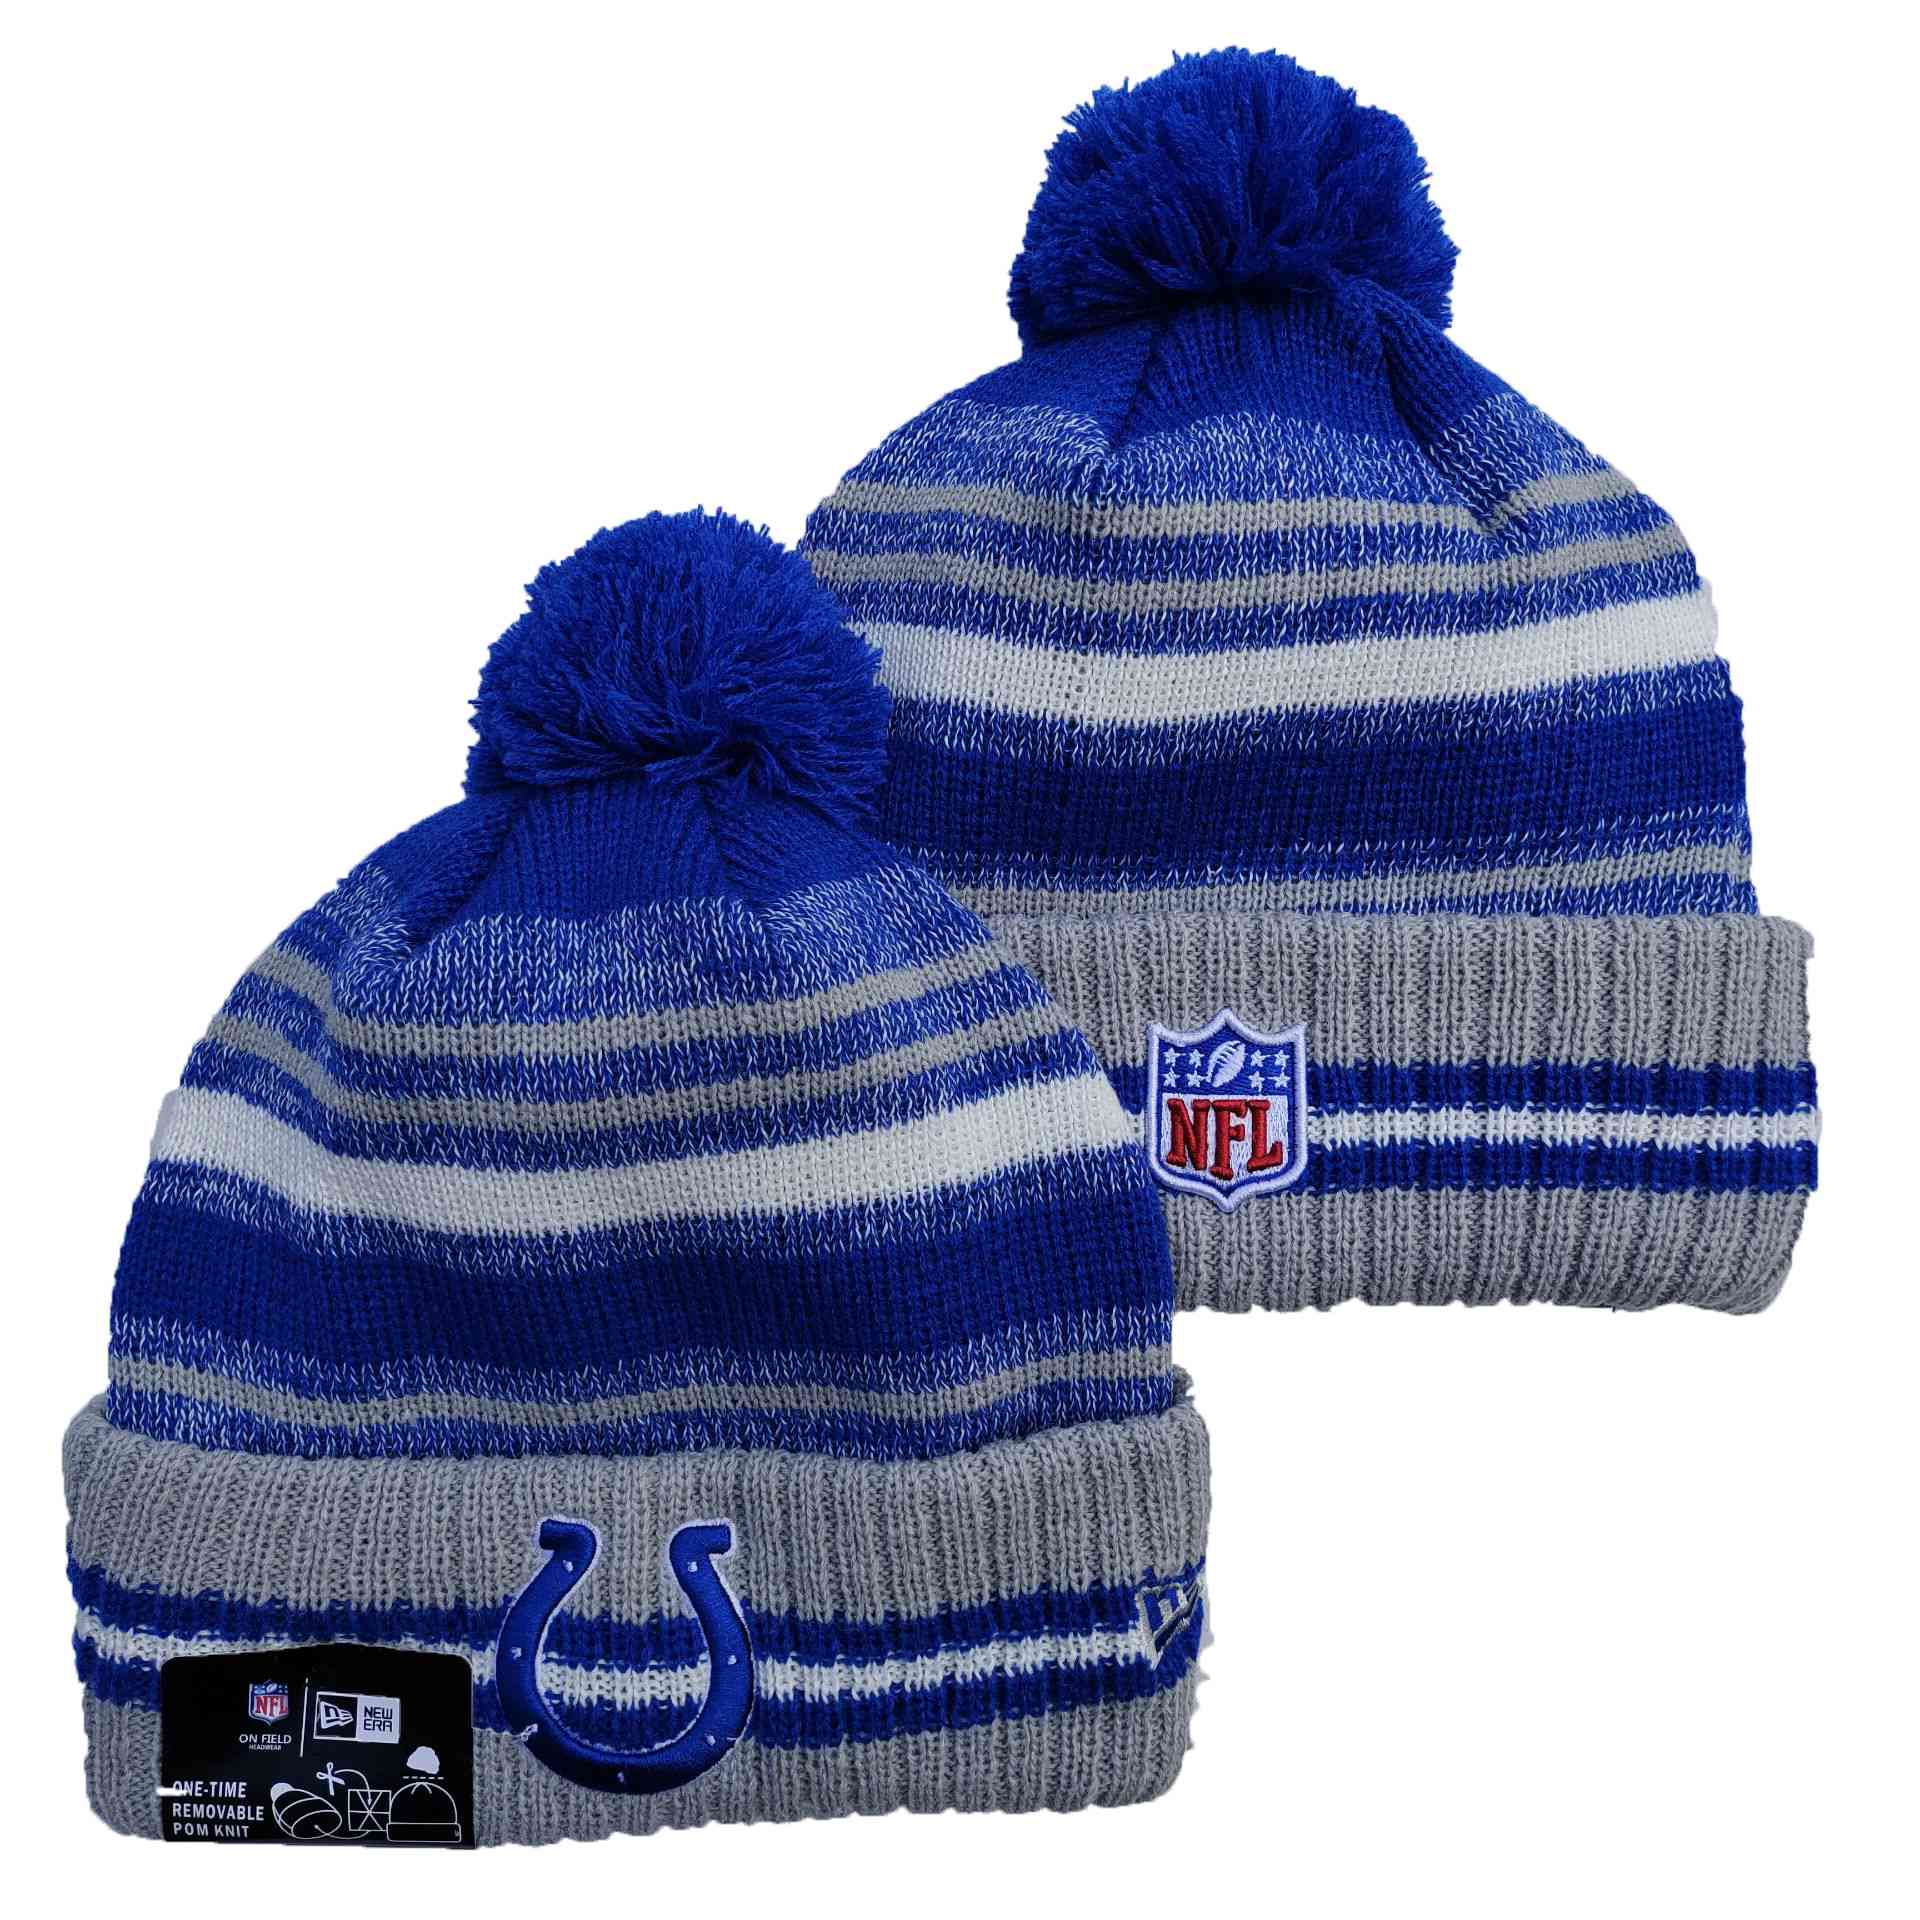 NFL Indianapolis Colts Beanies Knit Hats-YD1005